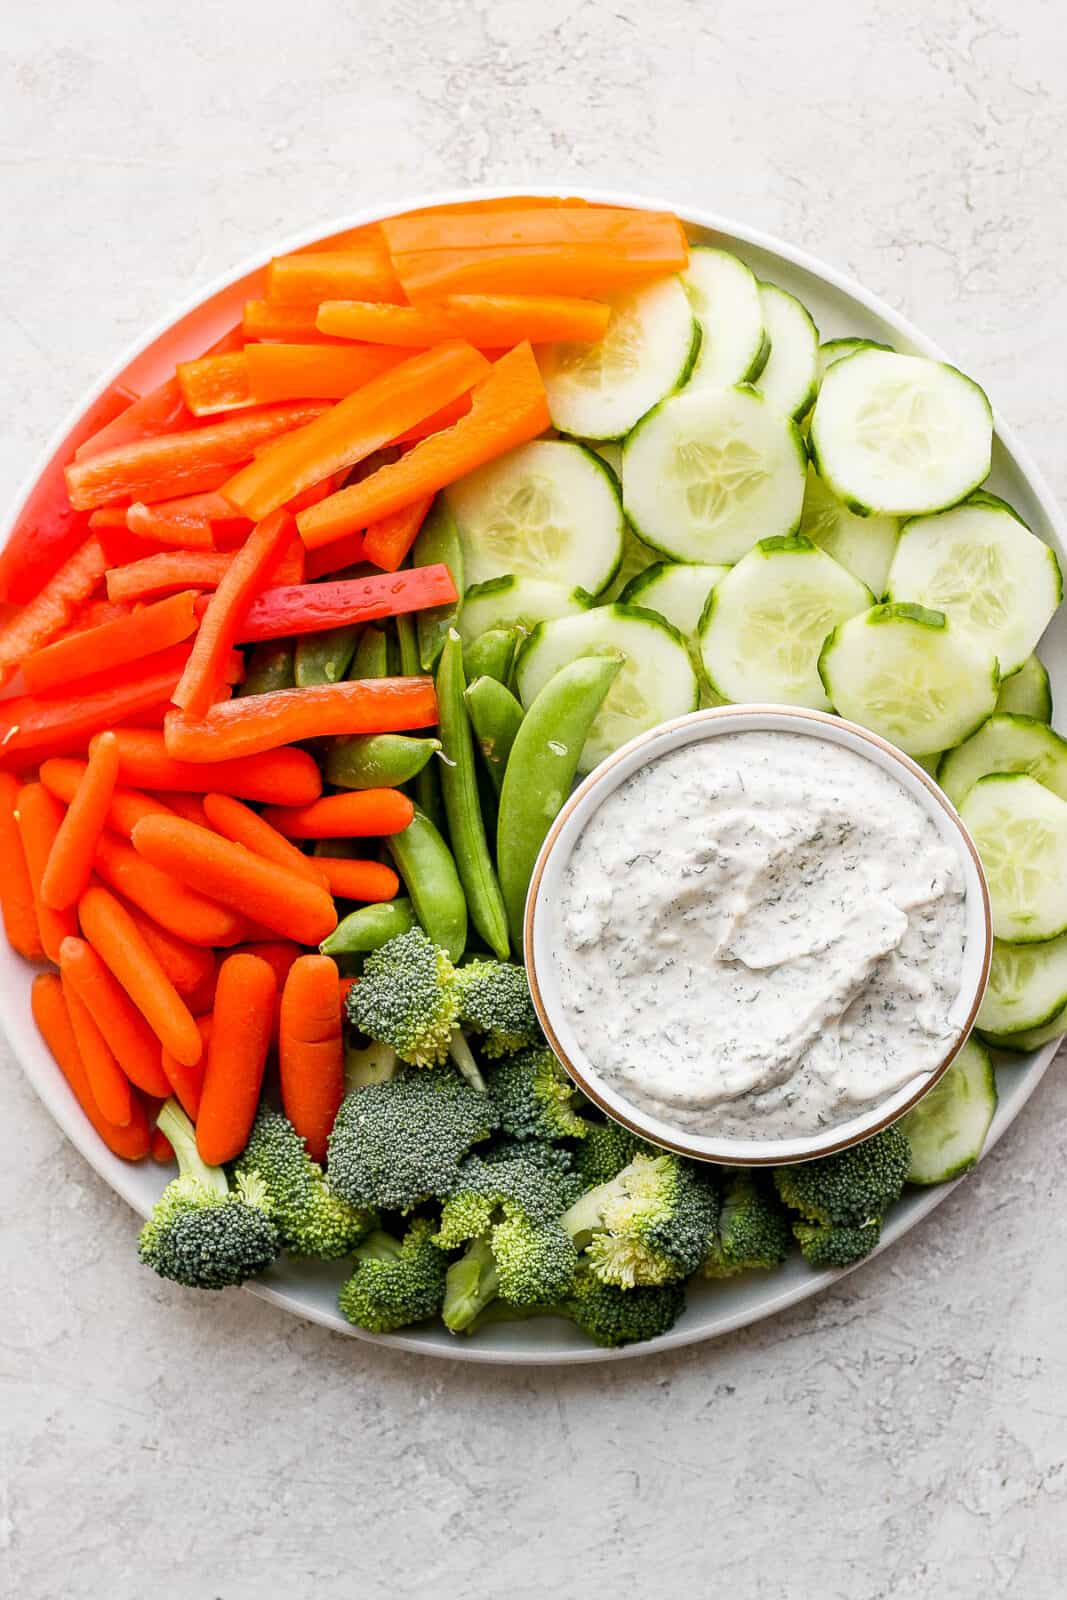 A small dish of healthy veggie dip on a plate of fresh veggies.